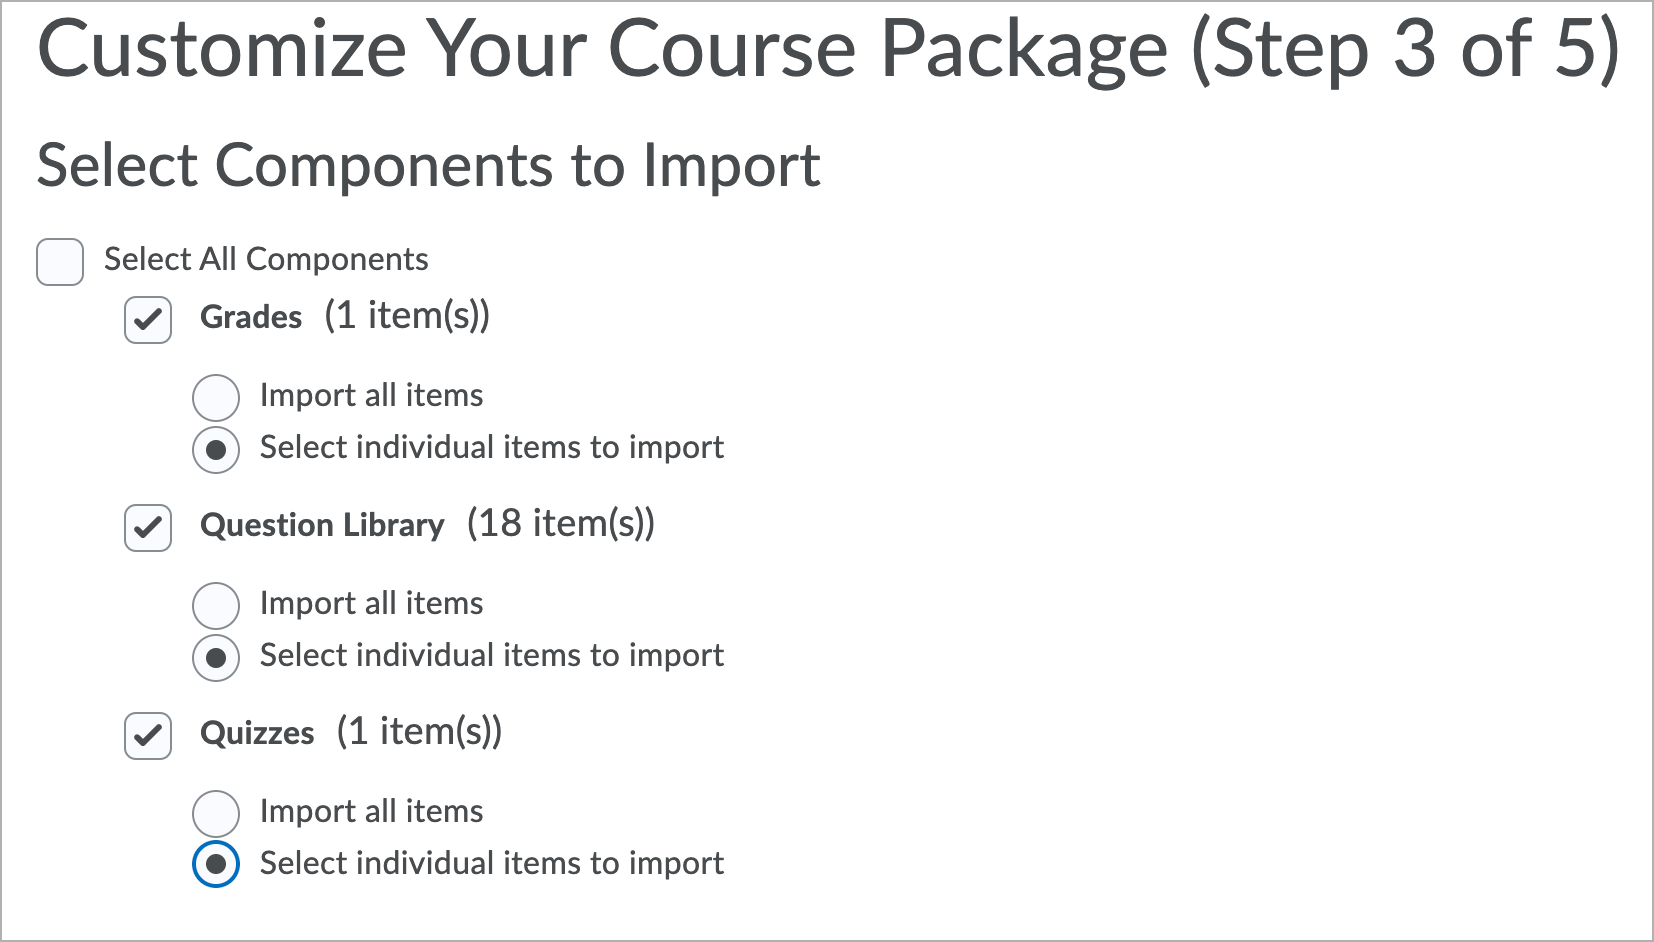 Check the sections of the package to import